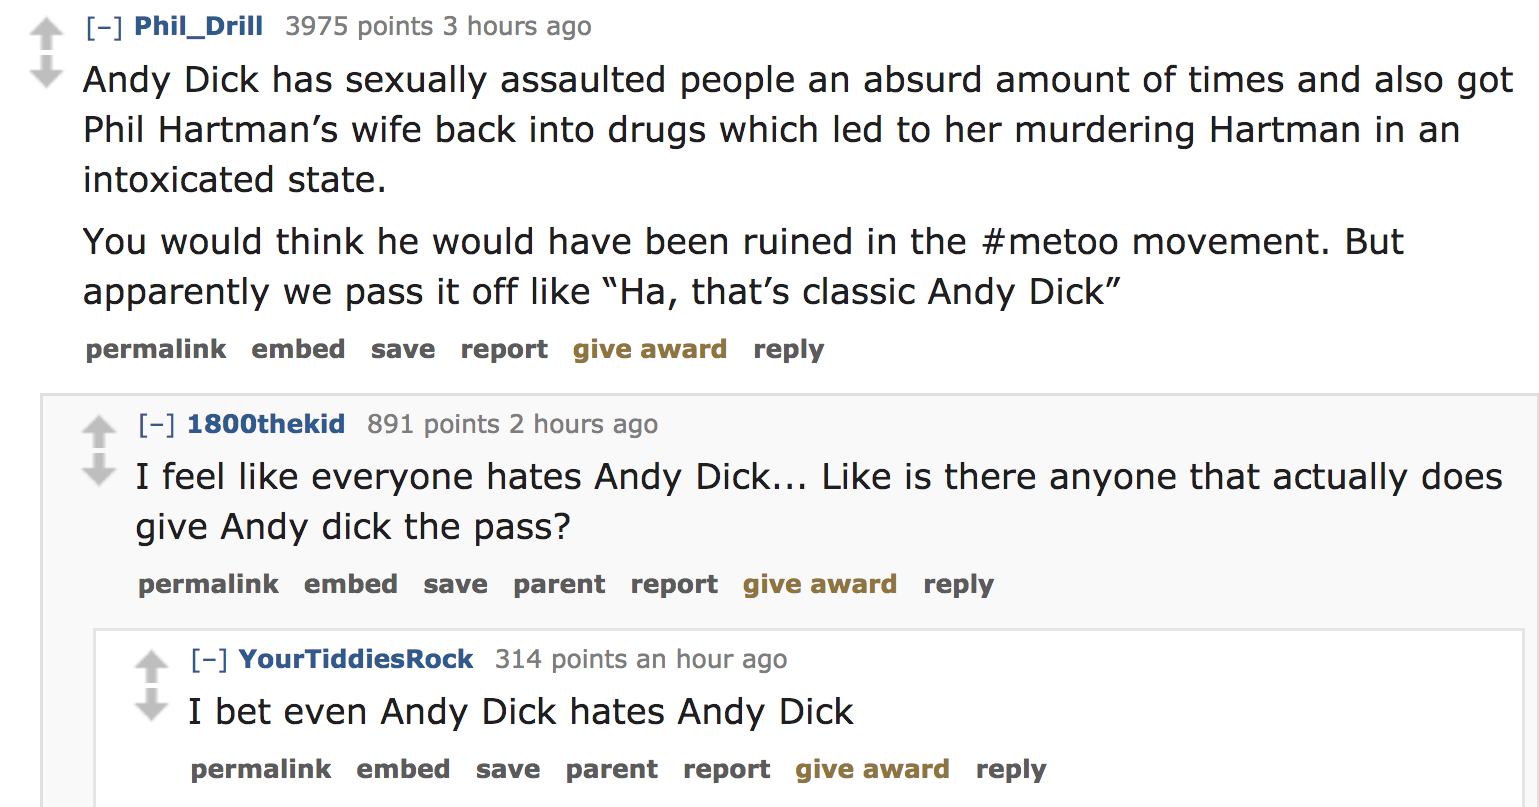 celebrity crimes - Andy Dick has sexually assaulted people an absurd amount of times and also got Phil Hartman's wife back into drugs which led to her murdering Hartman in an intoxicated state. You would think he would have been ru